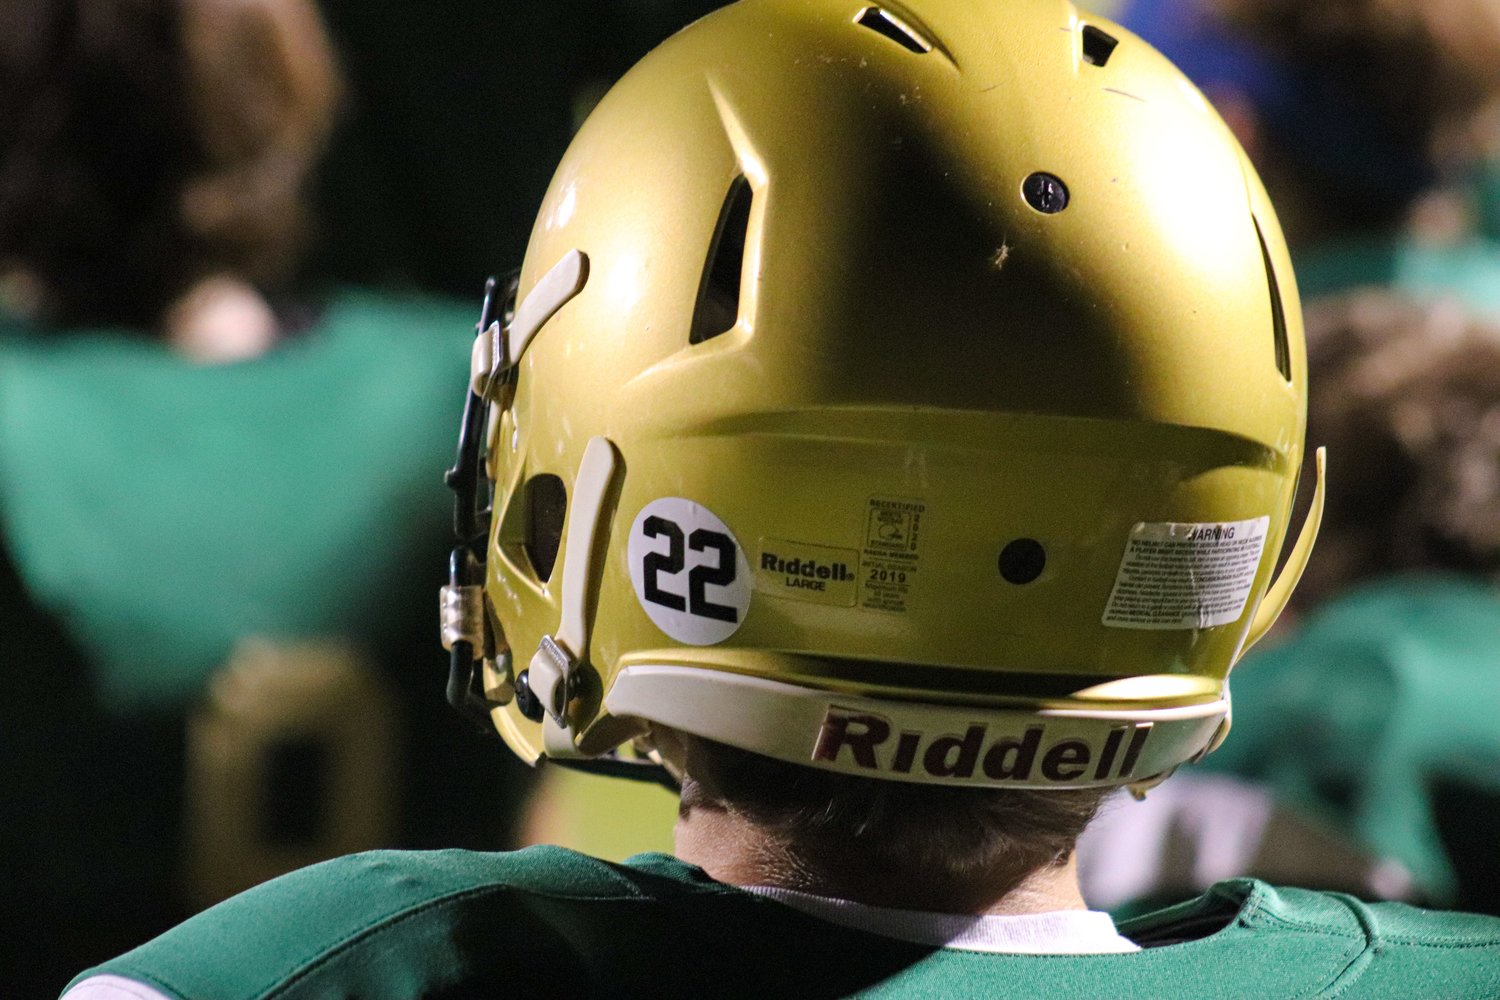 Northwood sported the number 22 on their helmets in their first-round playoff game against West Carteret on Friday in support of their teammate, sophomore Troy Ennis, who was diagnosed with Ewing's sarcoma on April 9. Chargers' head coach Cullen Homolka said he's 'like a son to me.'